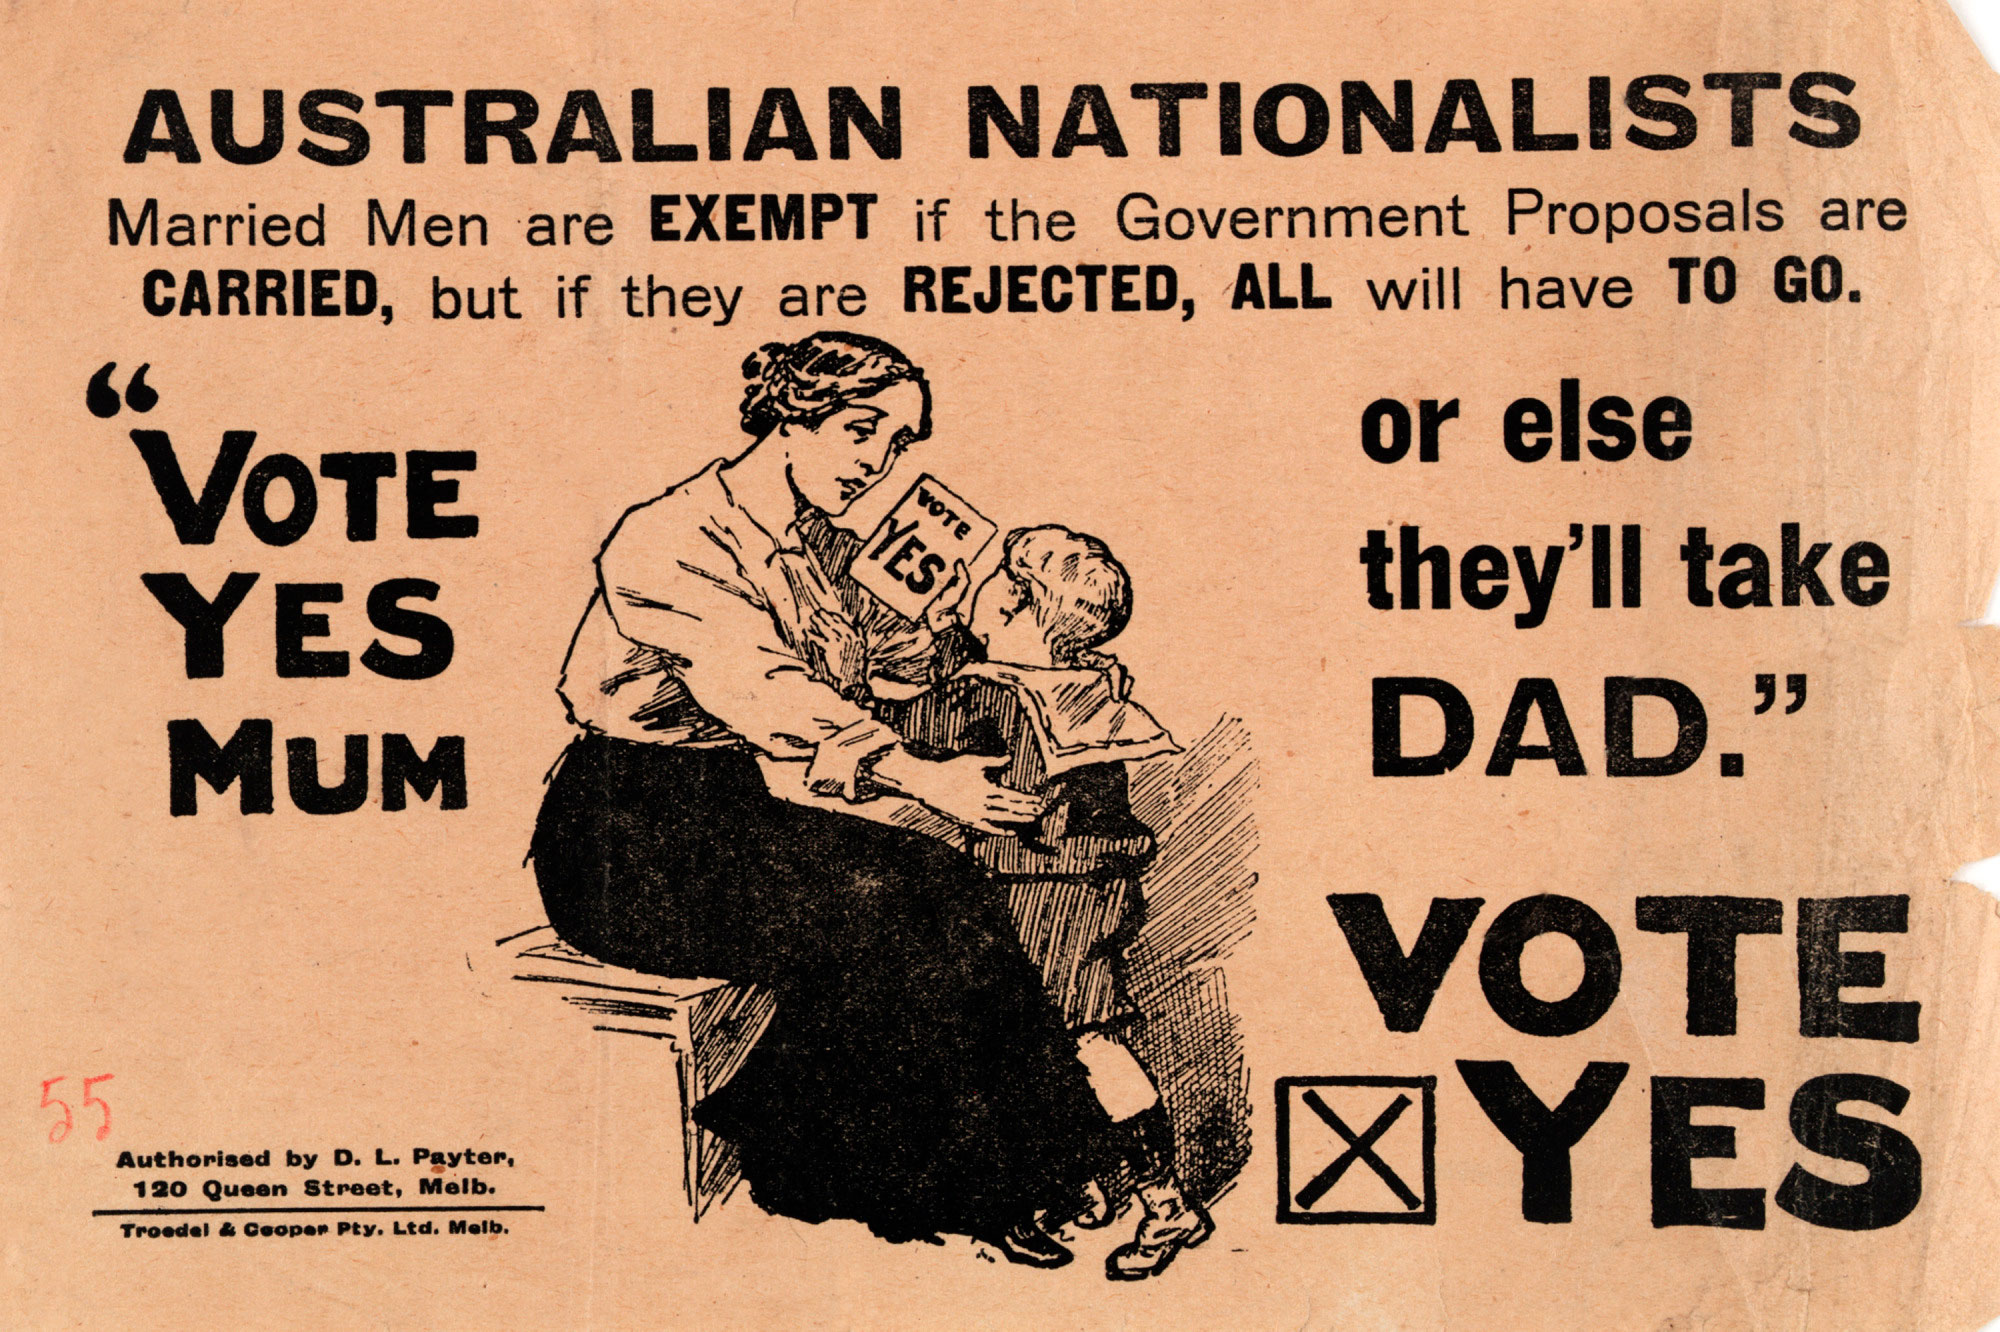 ‘Vote yes mum or else they’ll take dad’ leaflet, 1916.